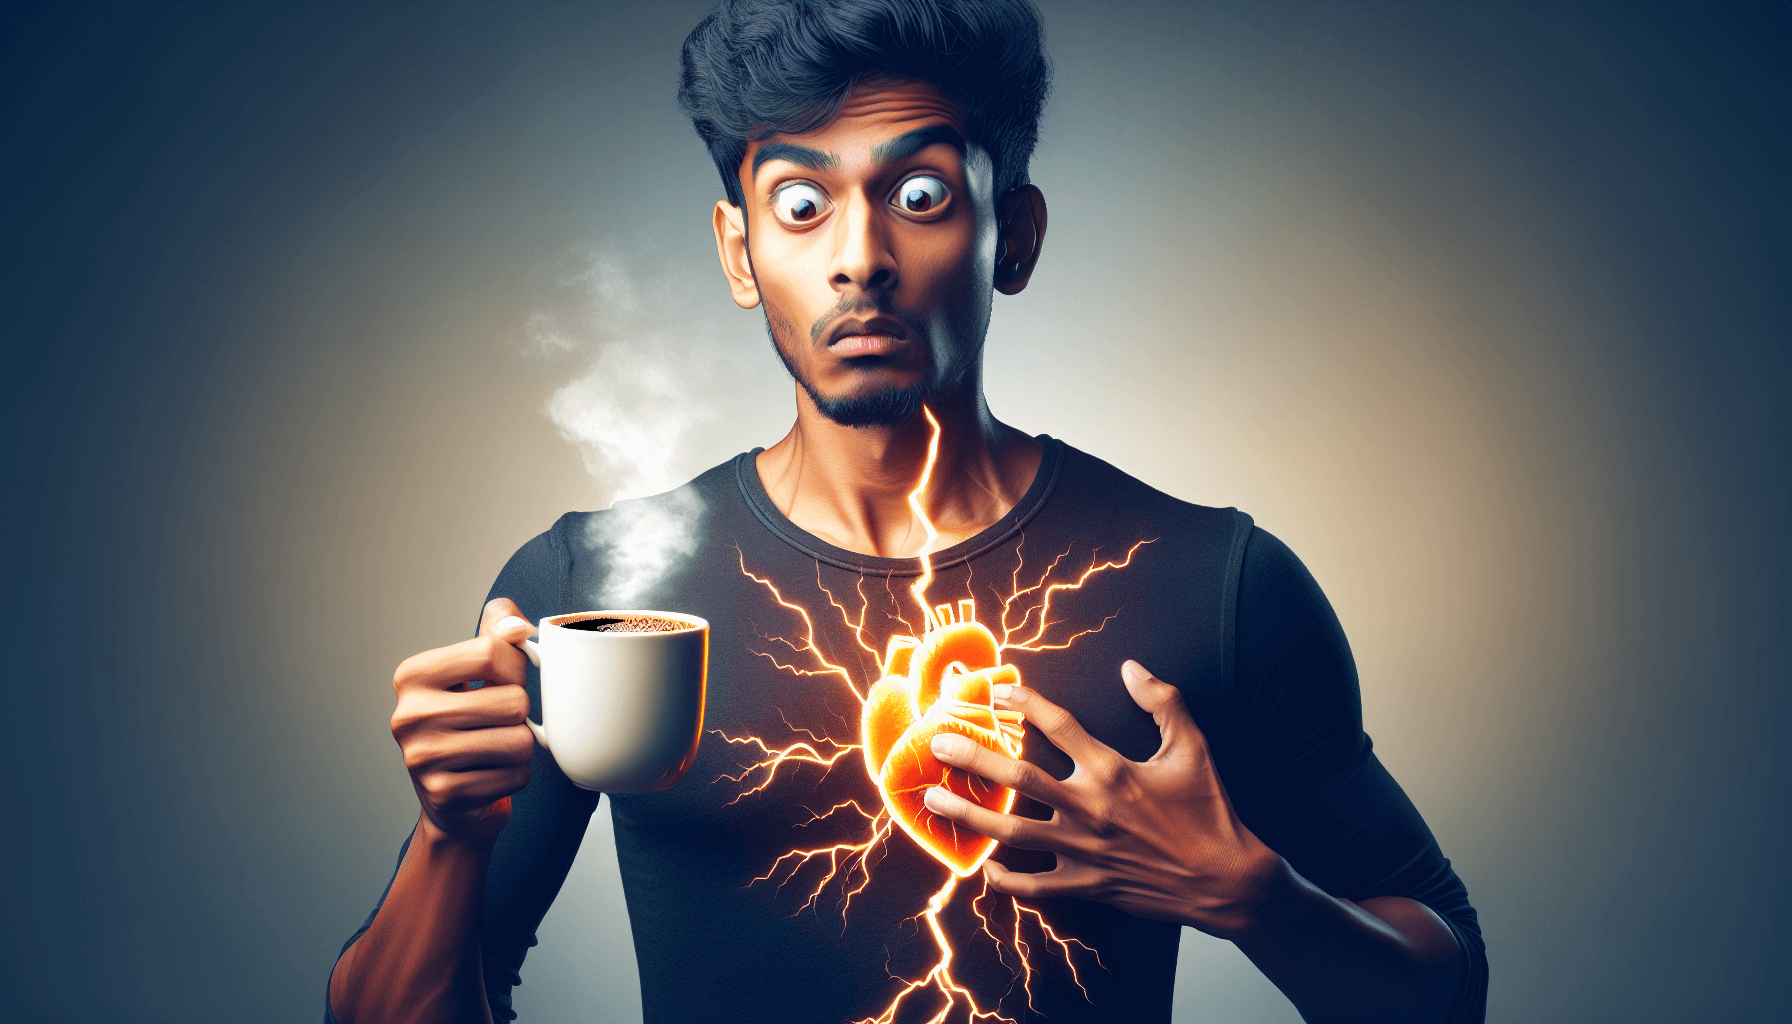 Illustration of a person drinking caffeine